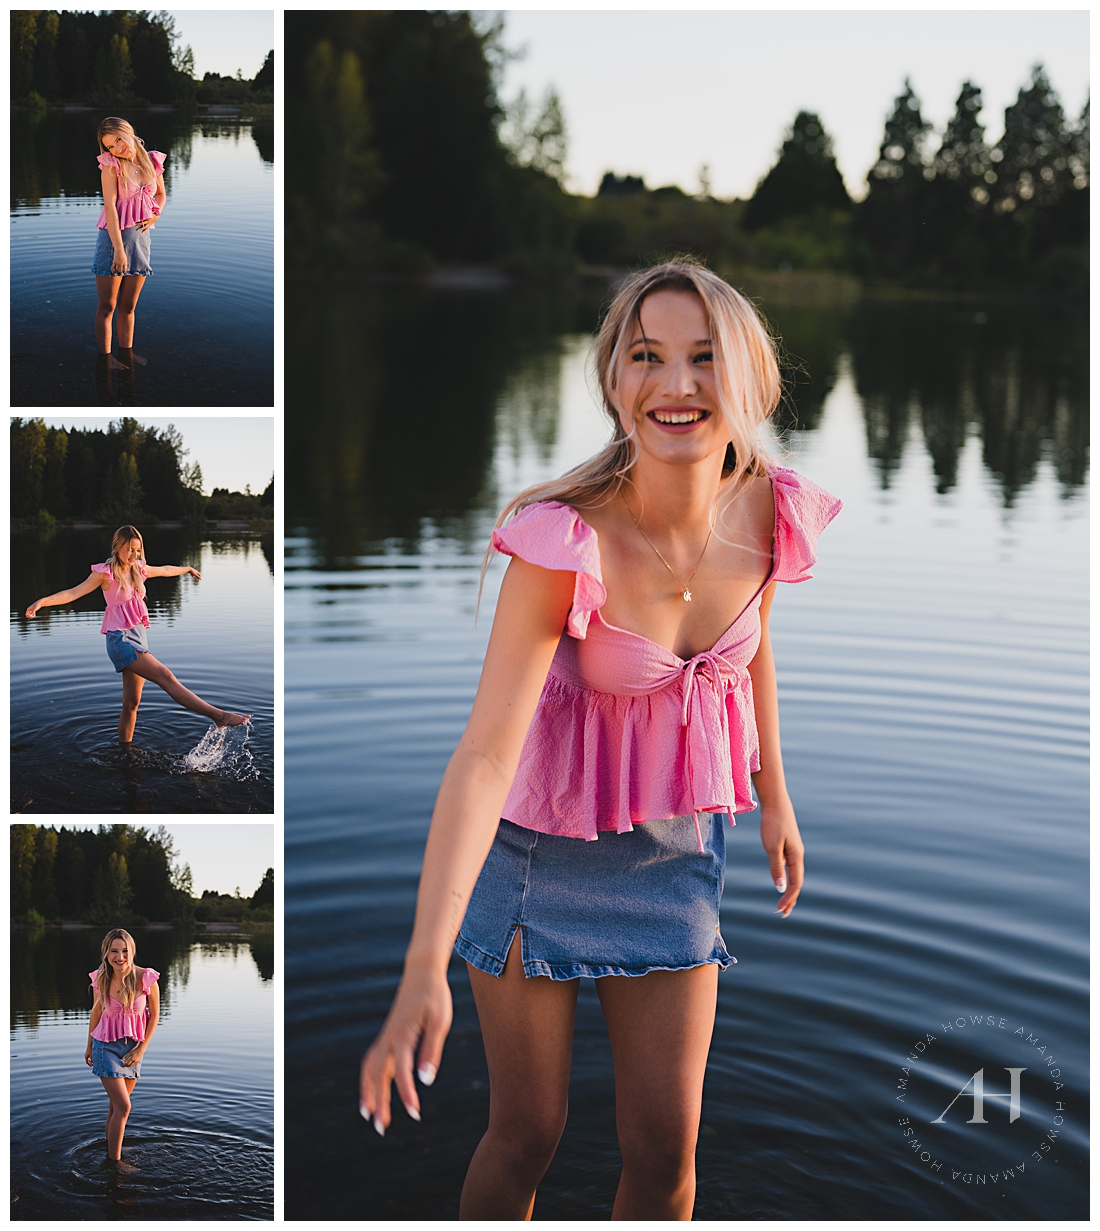 FUN poses for Water/Beach Photoshoots | PNW Seniors | Photographed by the Best Tacoma, Washington Senior Photographer Amanda Howse Photography